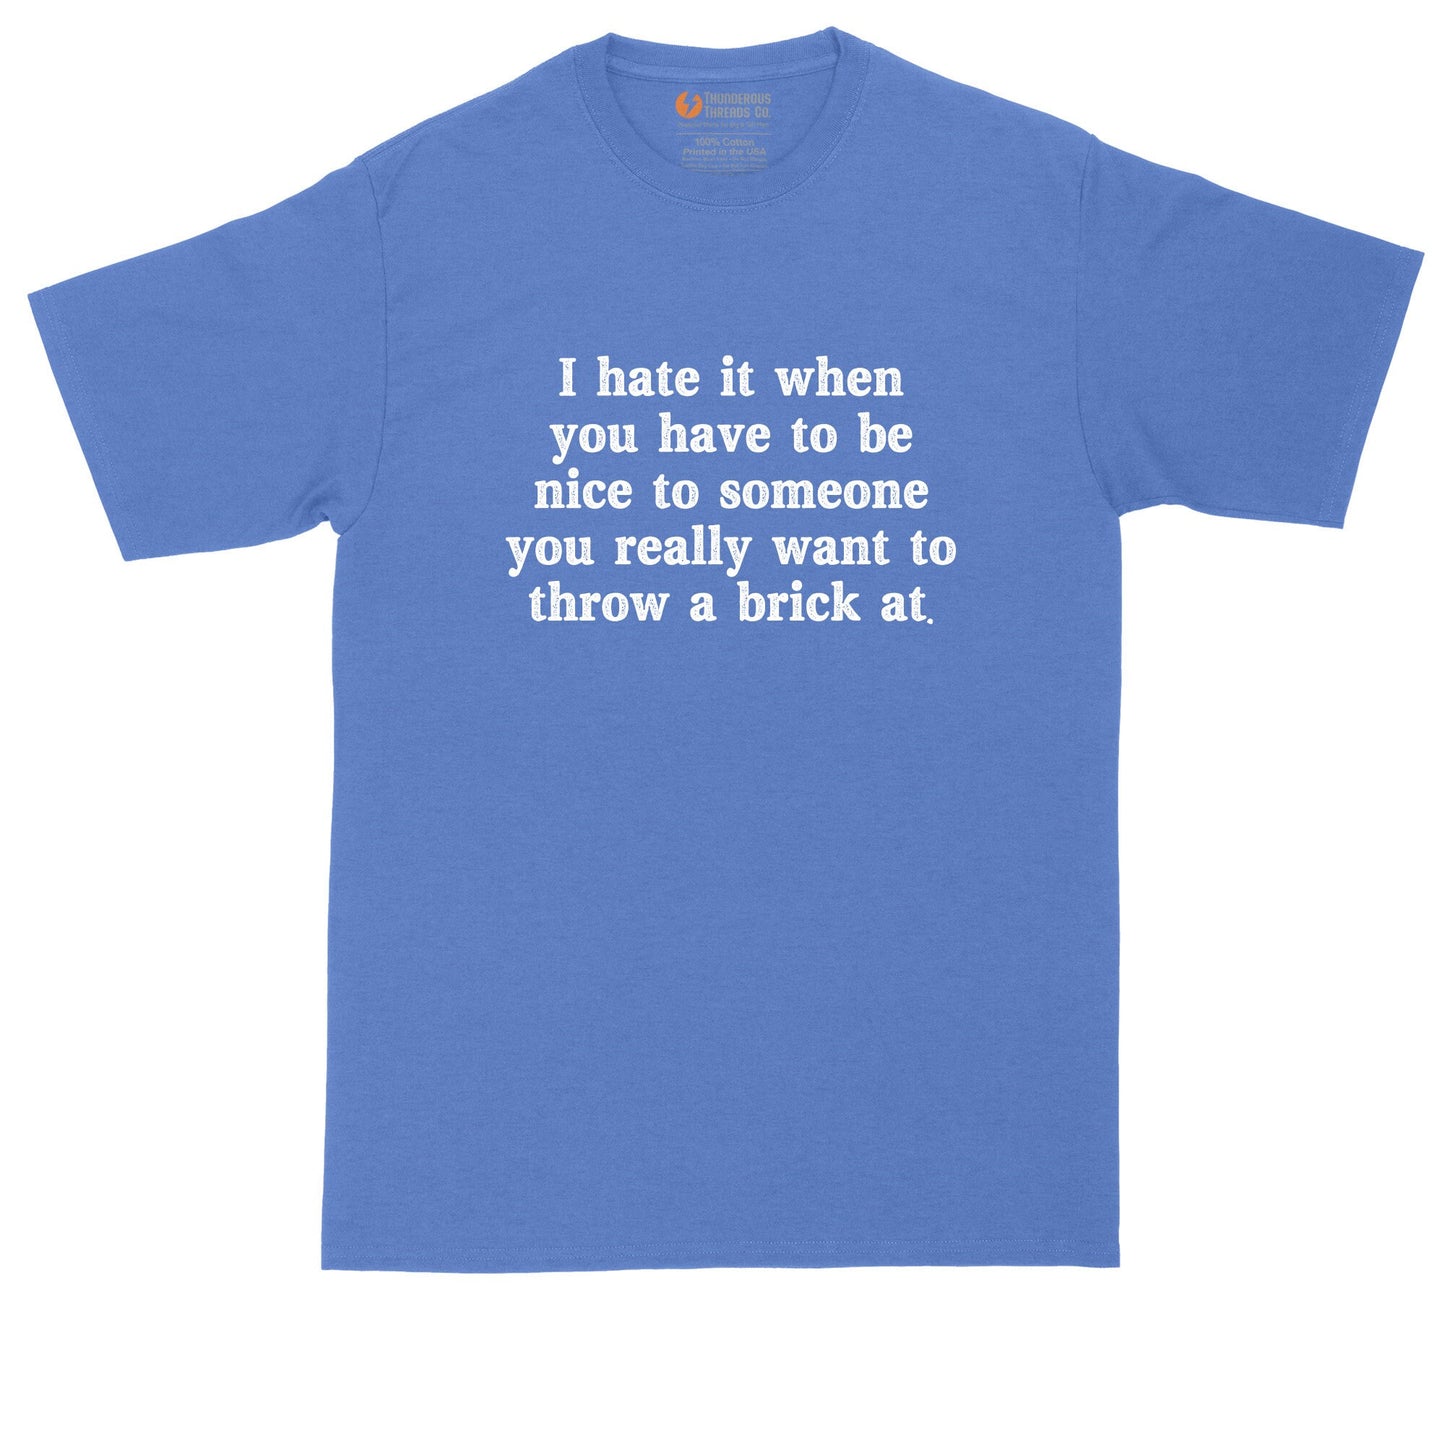 I Hate it When You Have to be Nice to Someone | Big and Tall Mens T-Shirt | Funny T-Shirt | Graphic T-Shirt